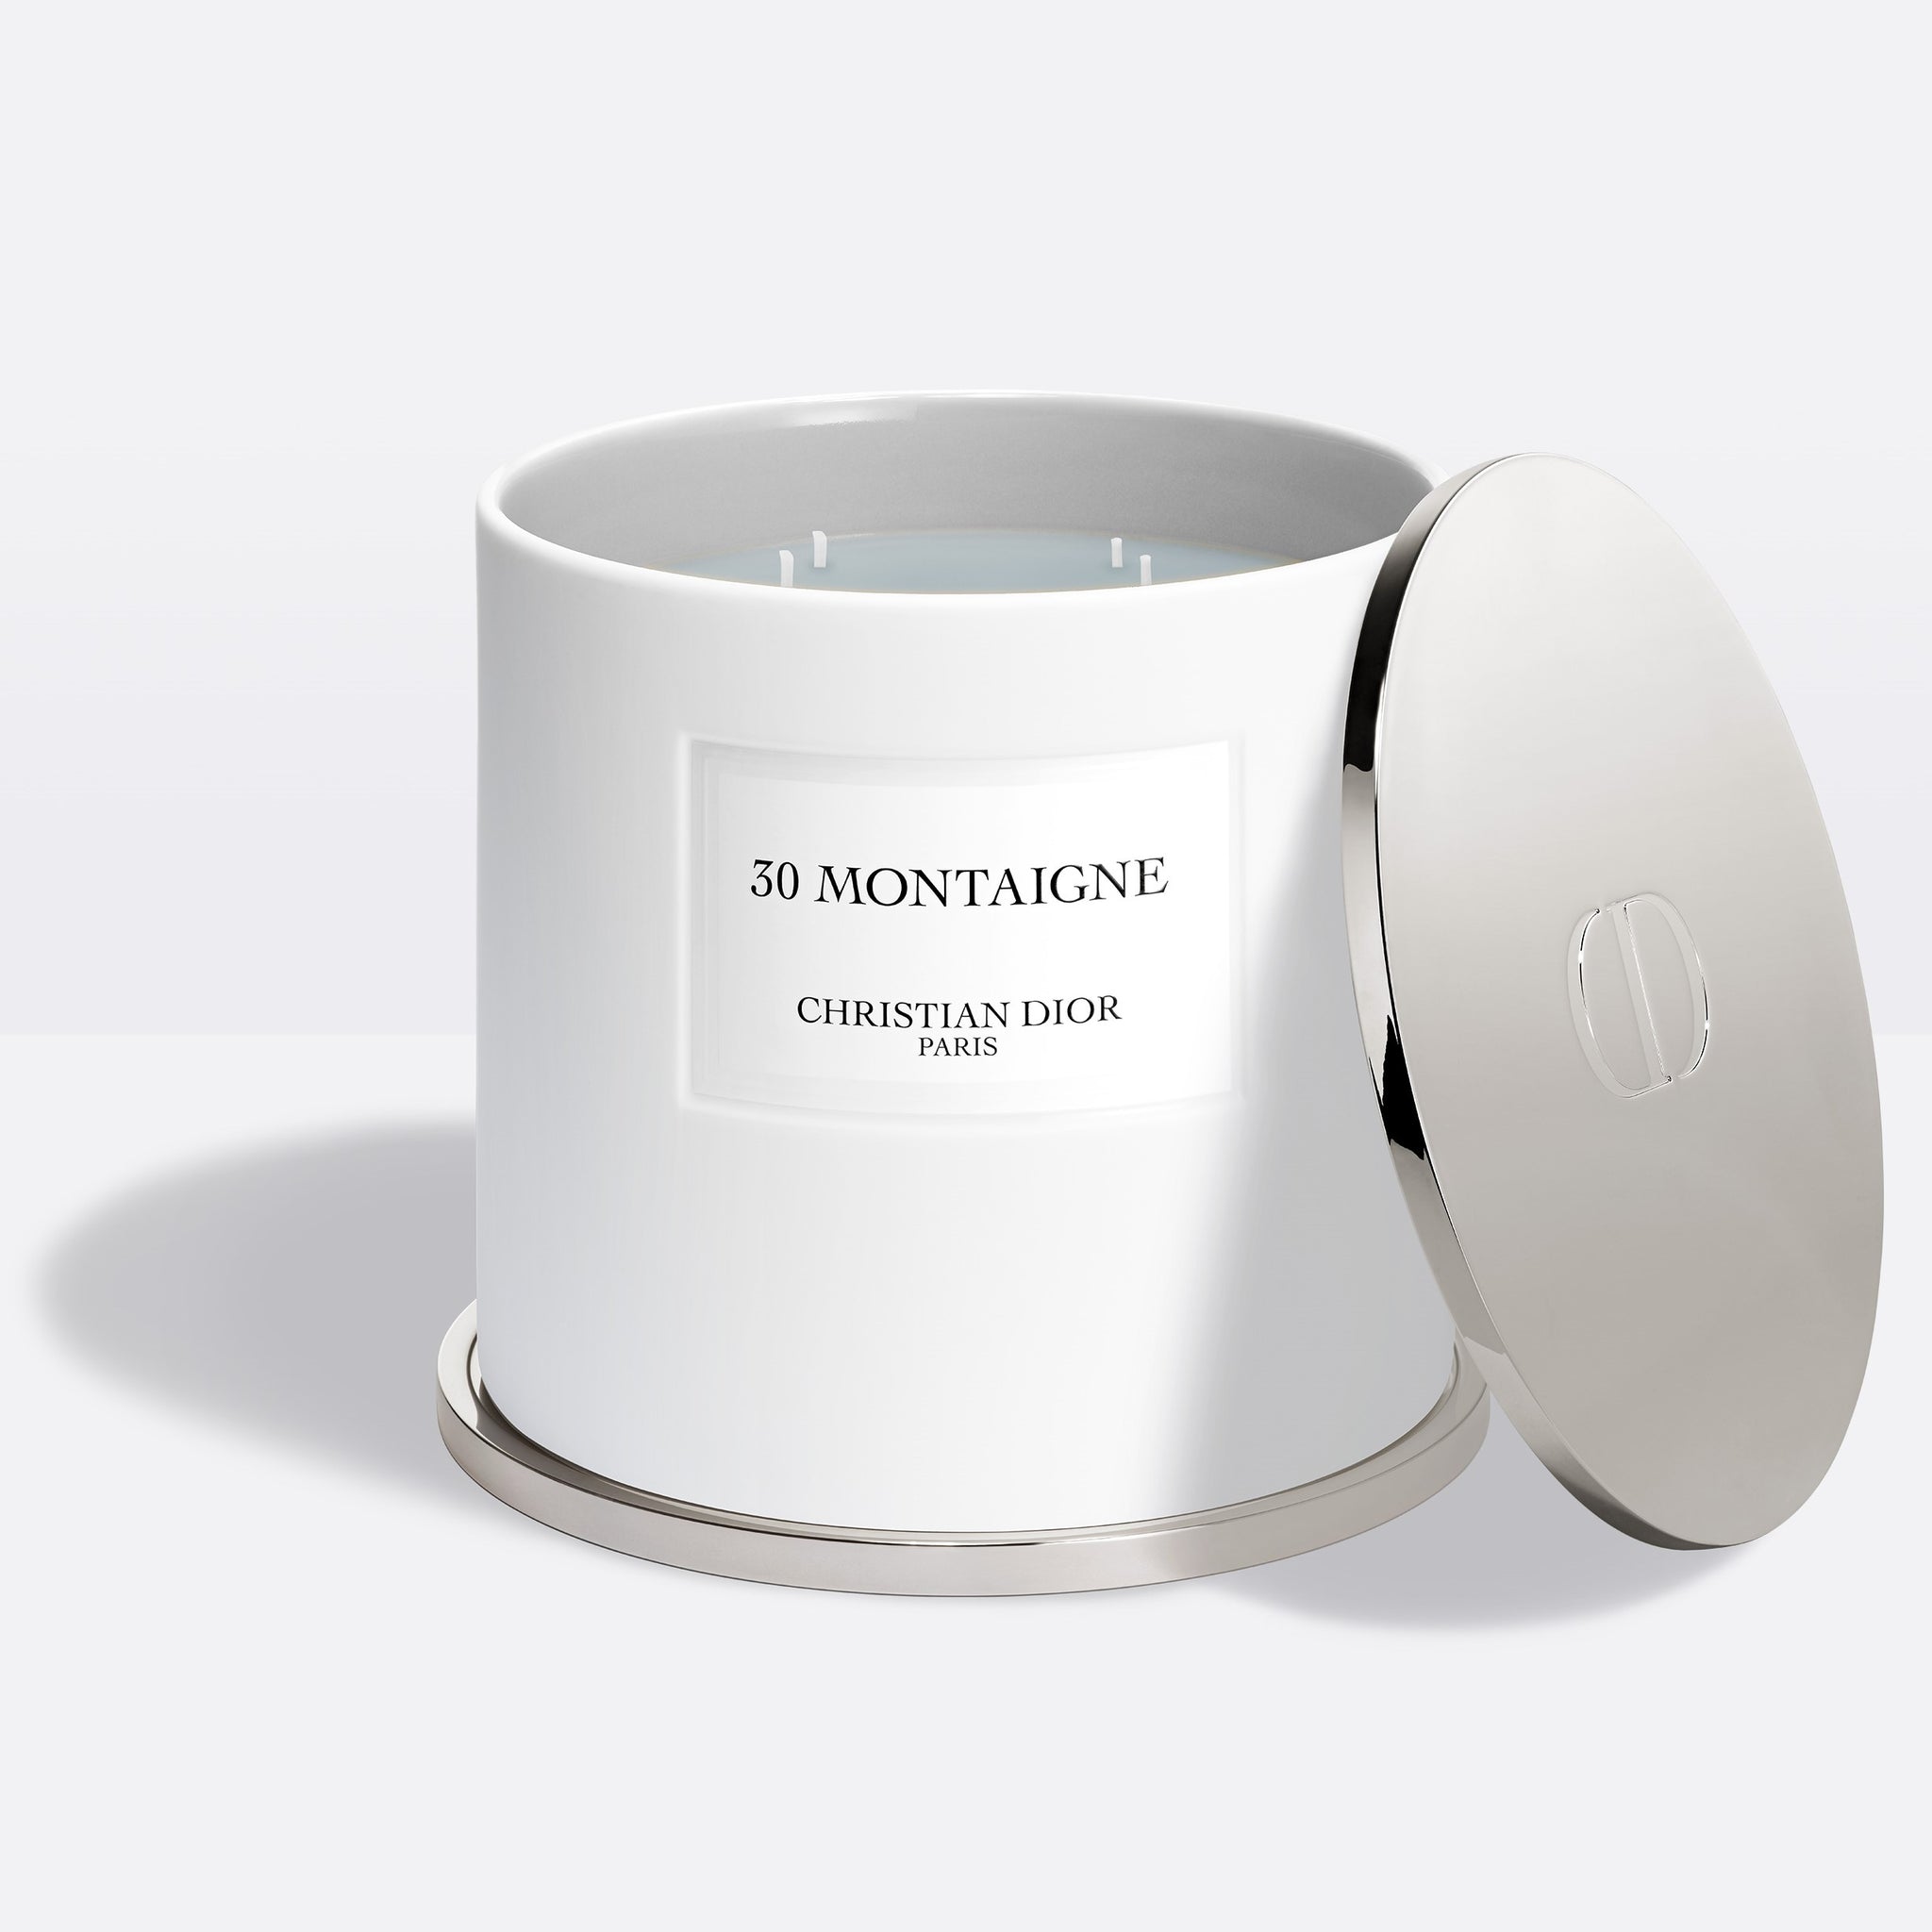 30 MONTAIGNE GIANT CANDLE ~ Scented Candle - Amber and Spicy Notes